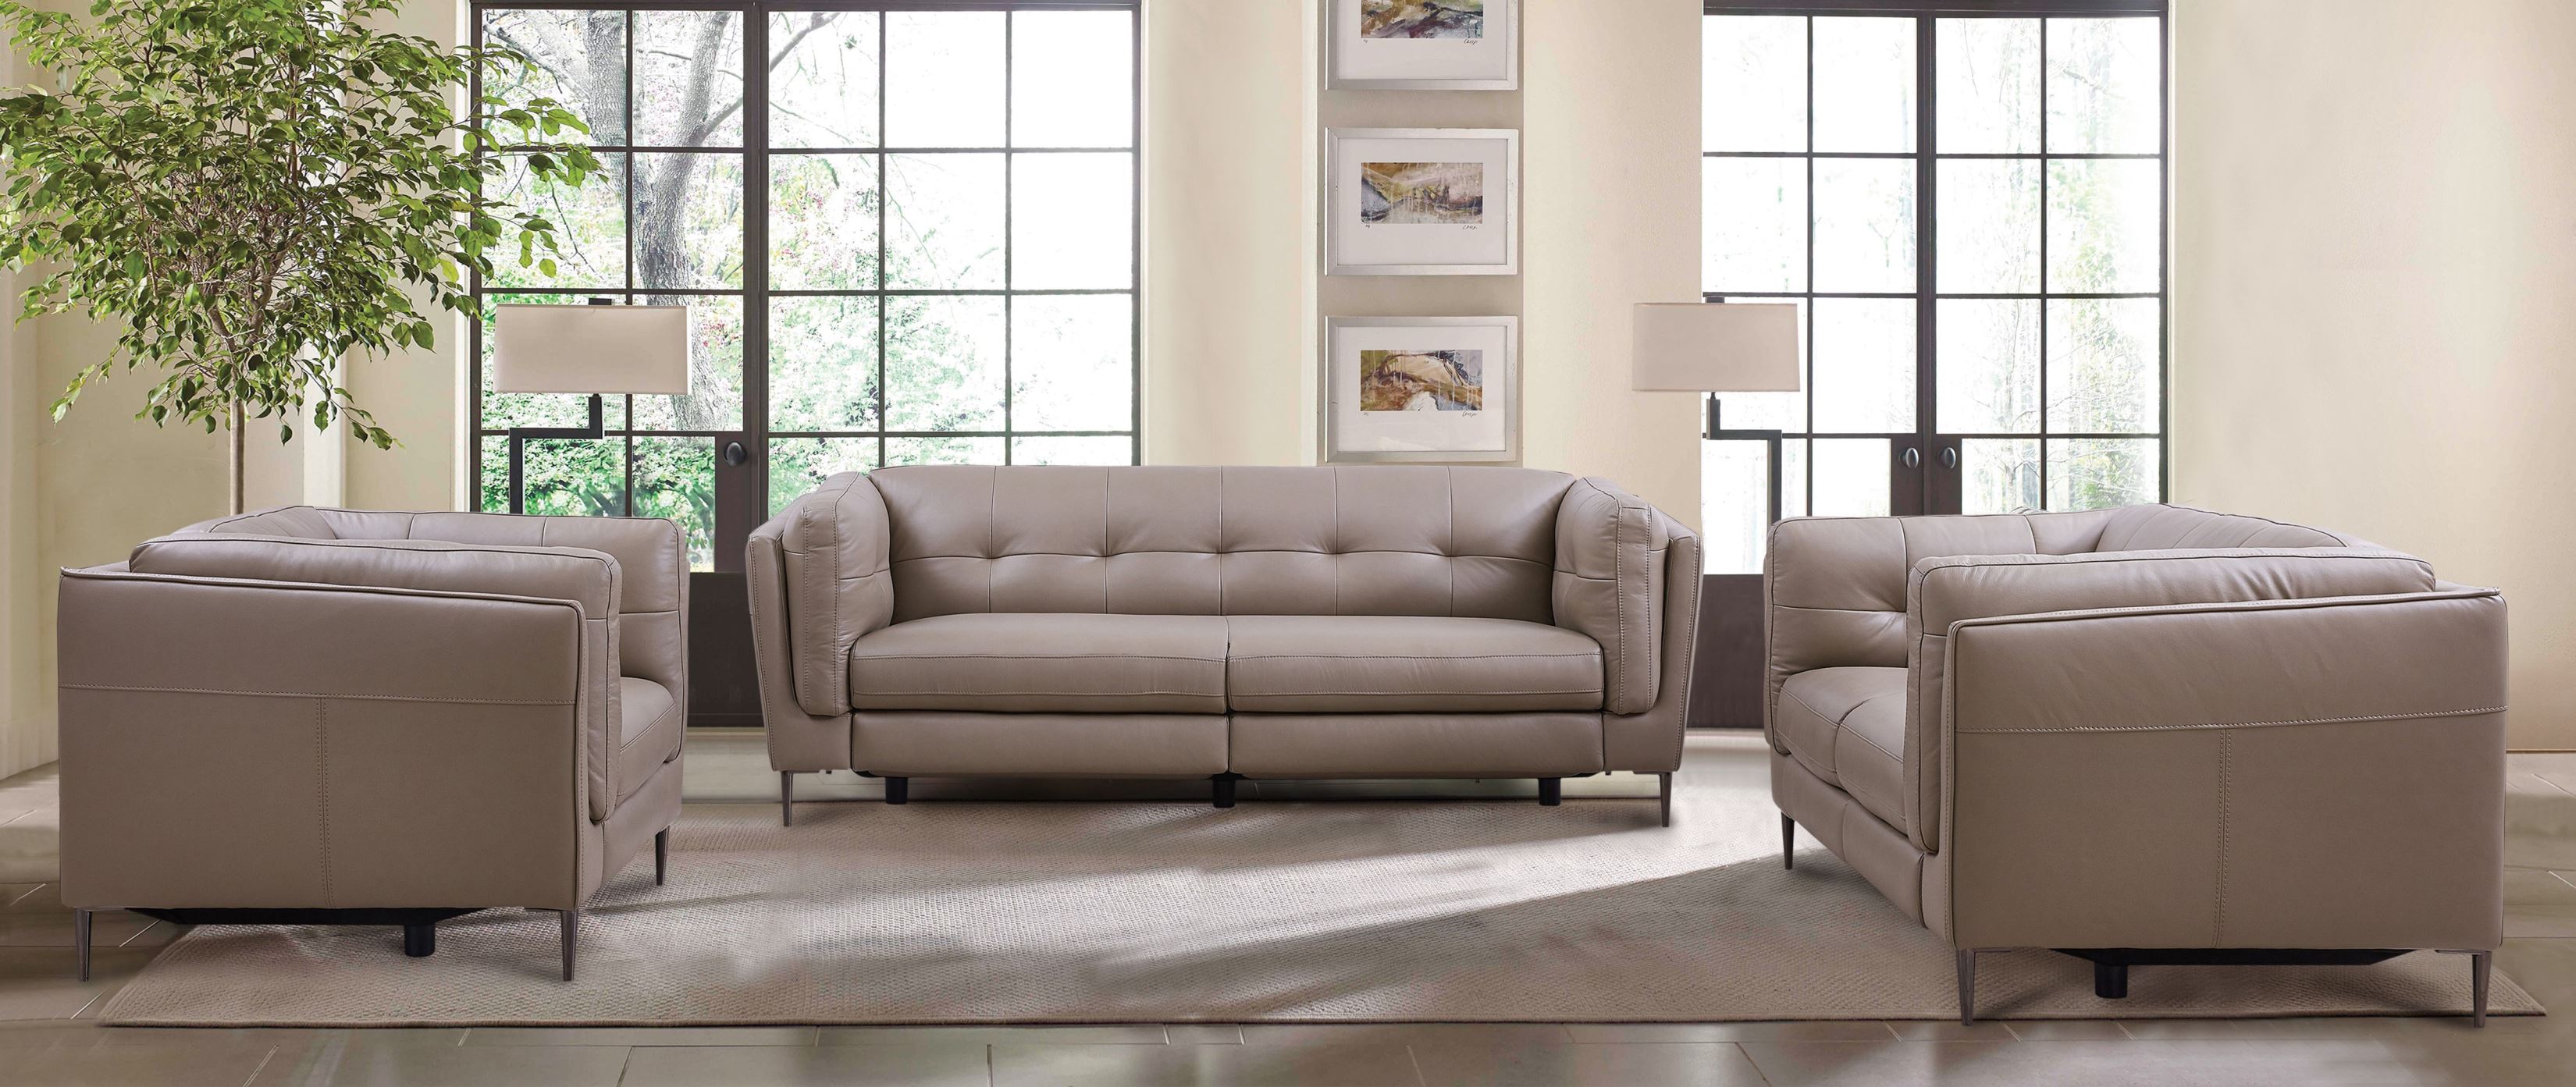 greige leather reclining sofa